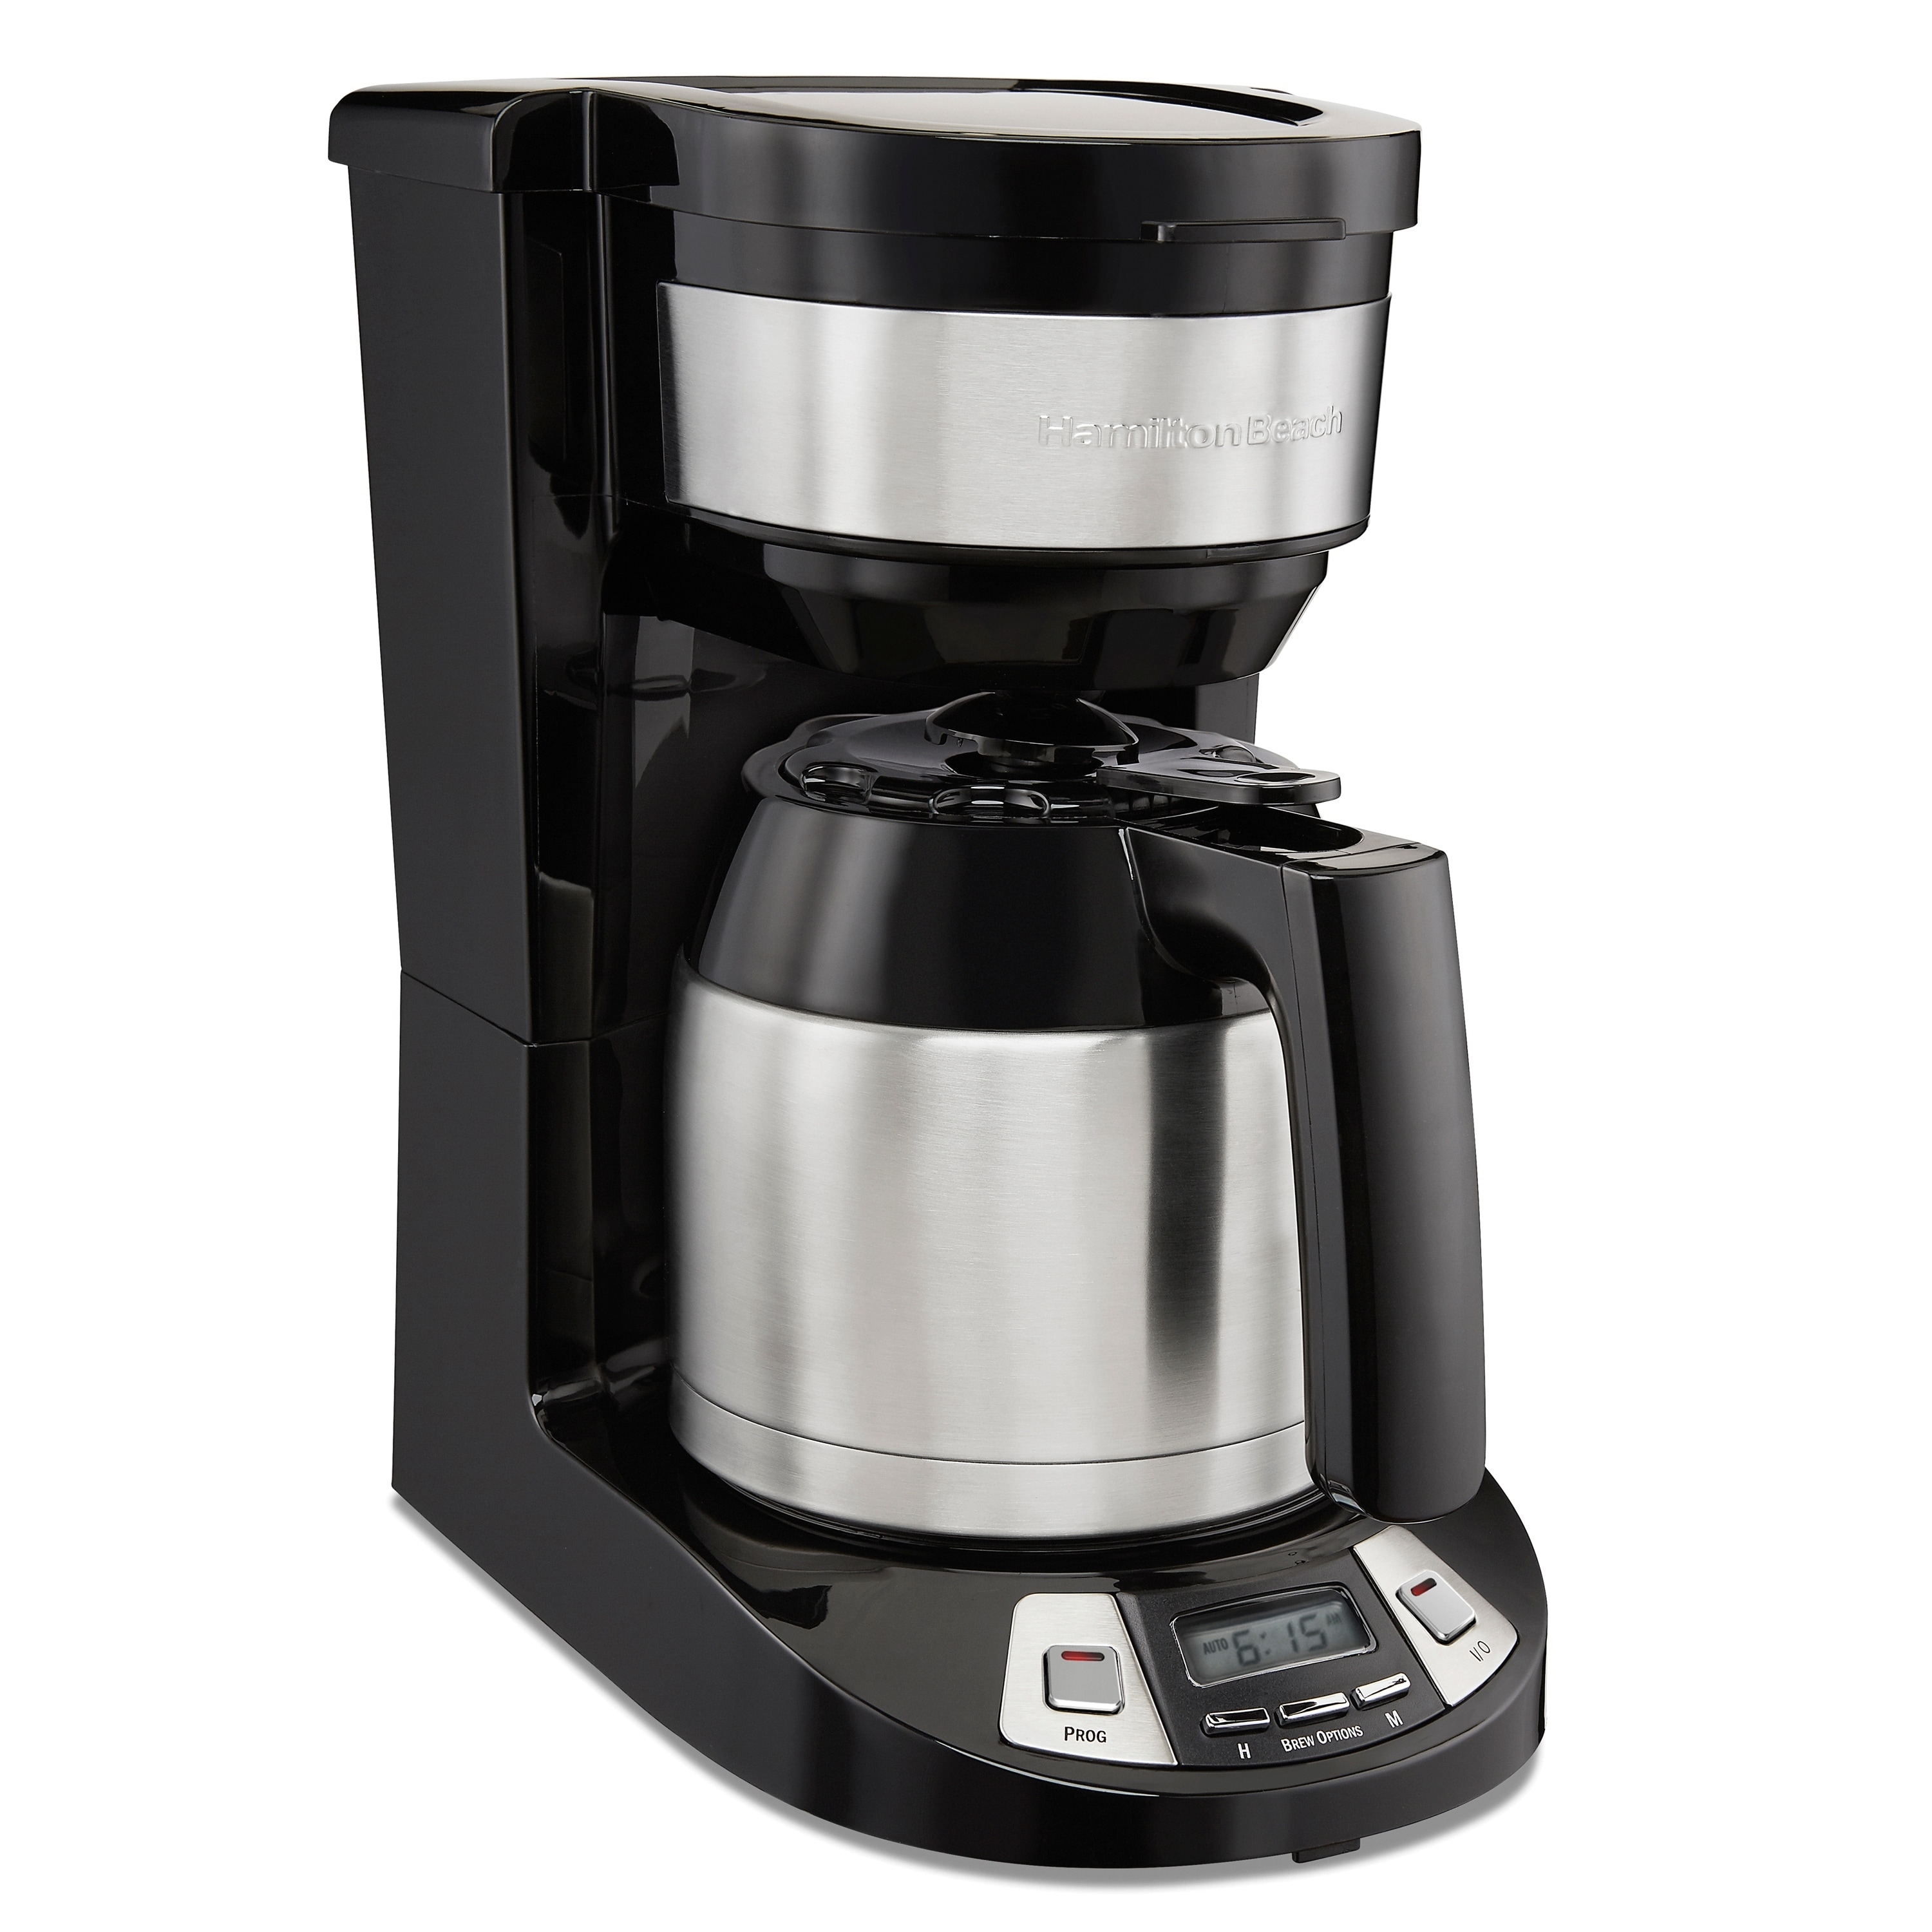 Hamilton Beach® 5 Cup Compact Coffee Maker with Glass Carafe & Reviews